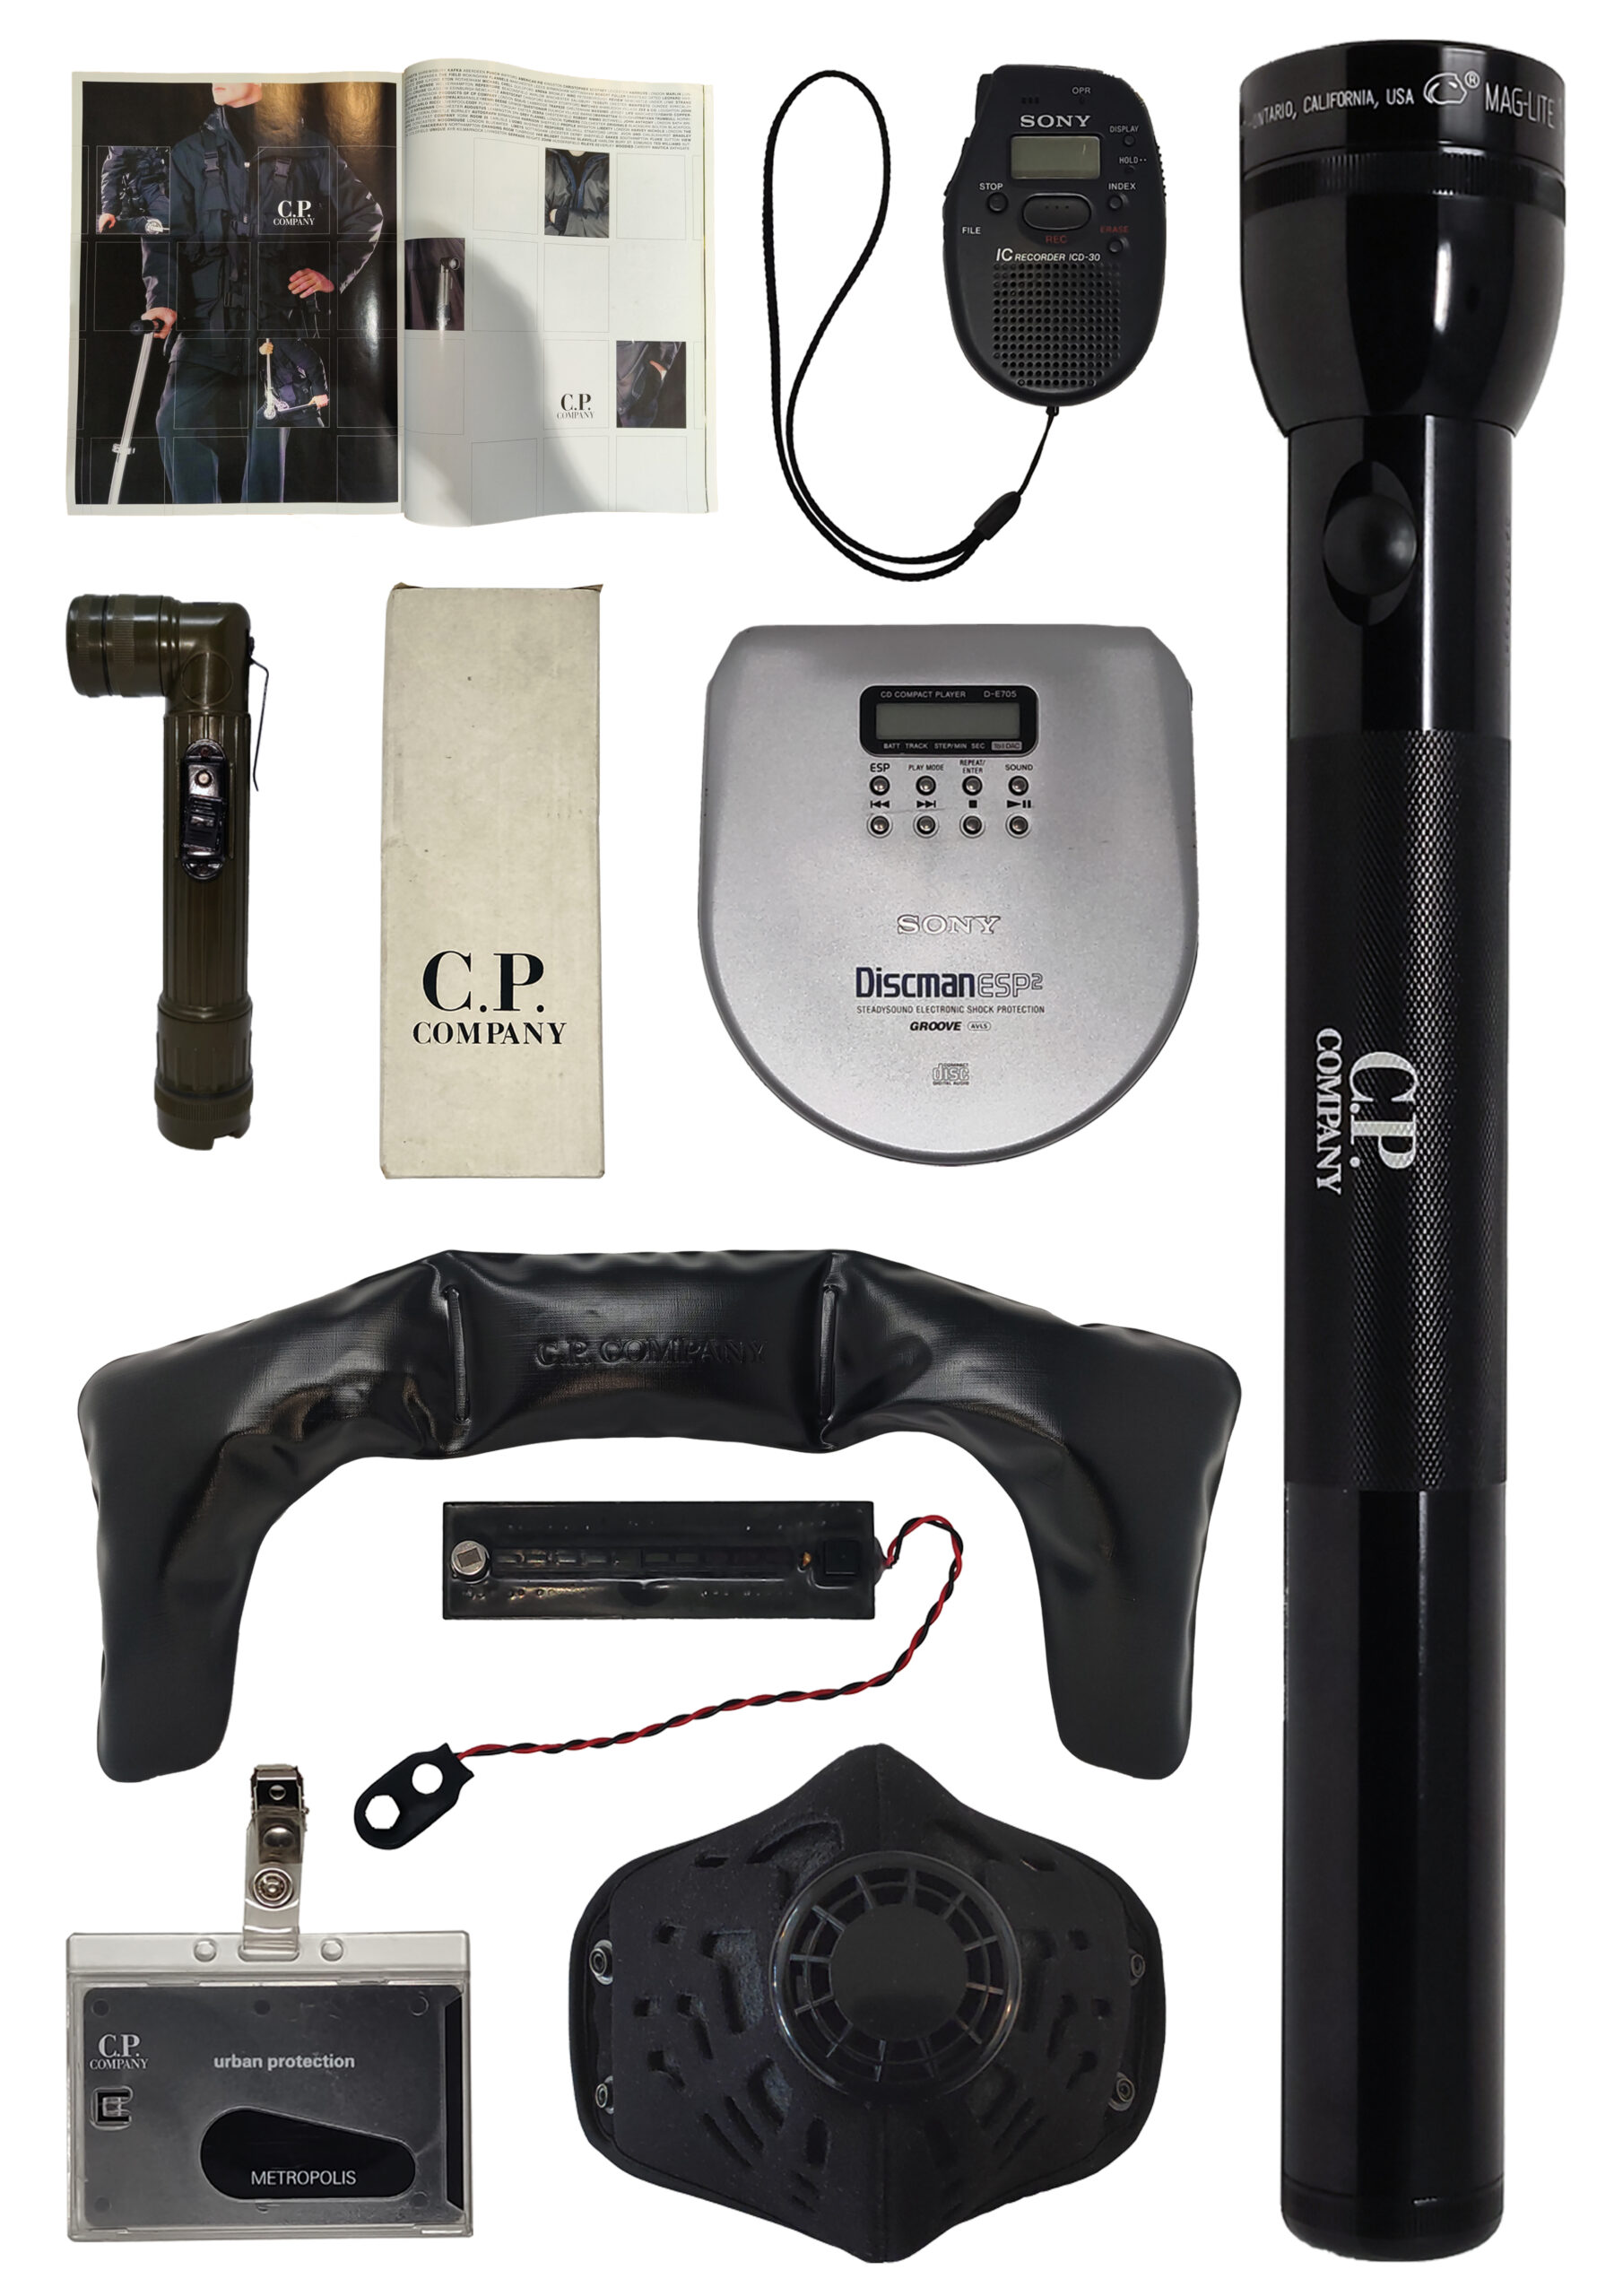 Objects from the Urban Protection range